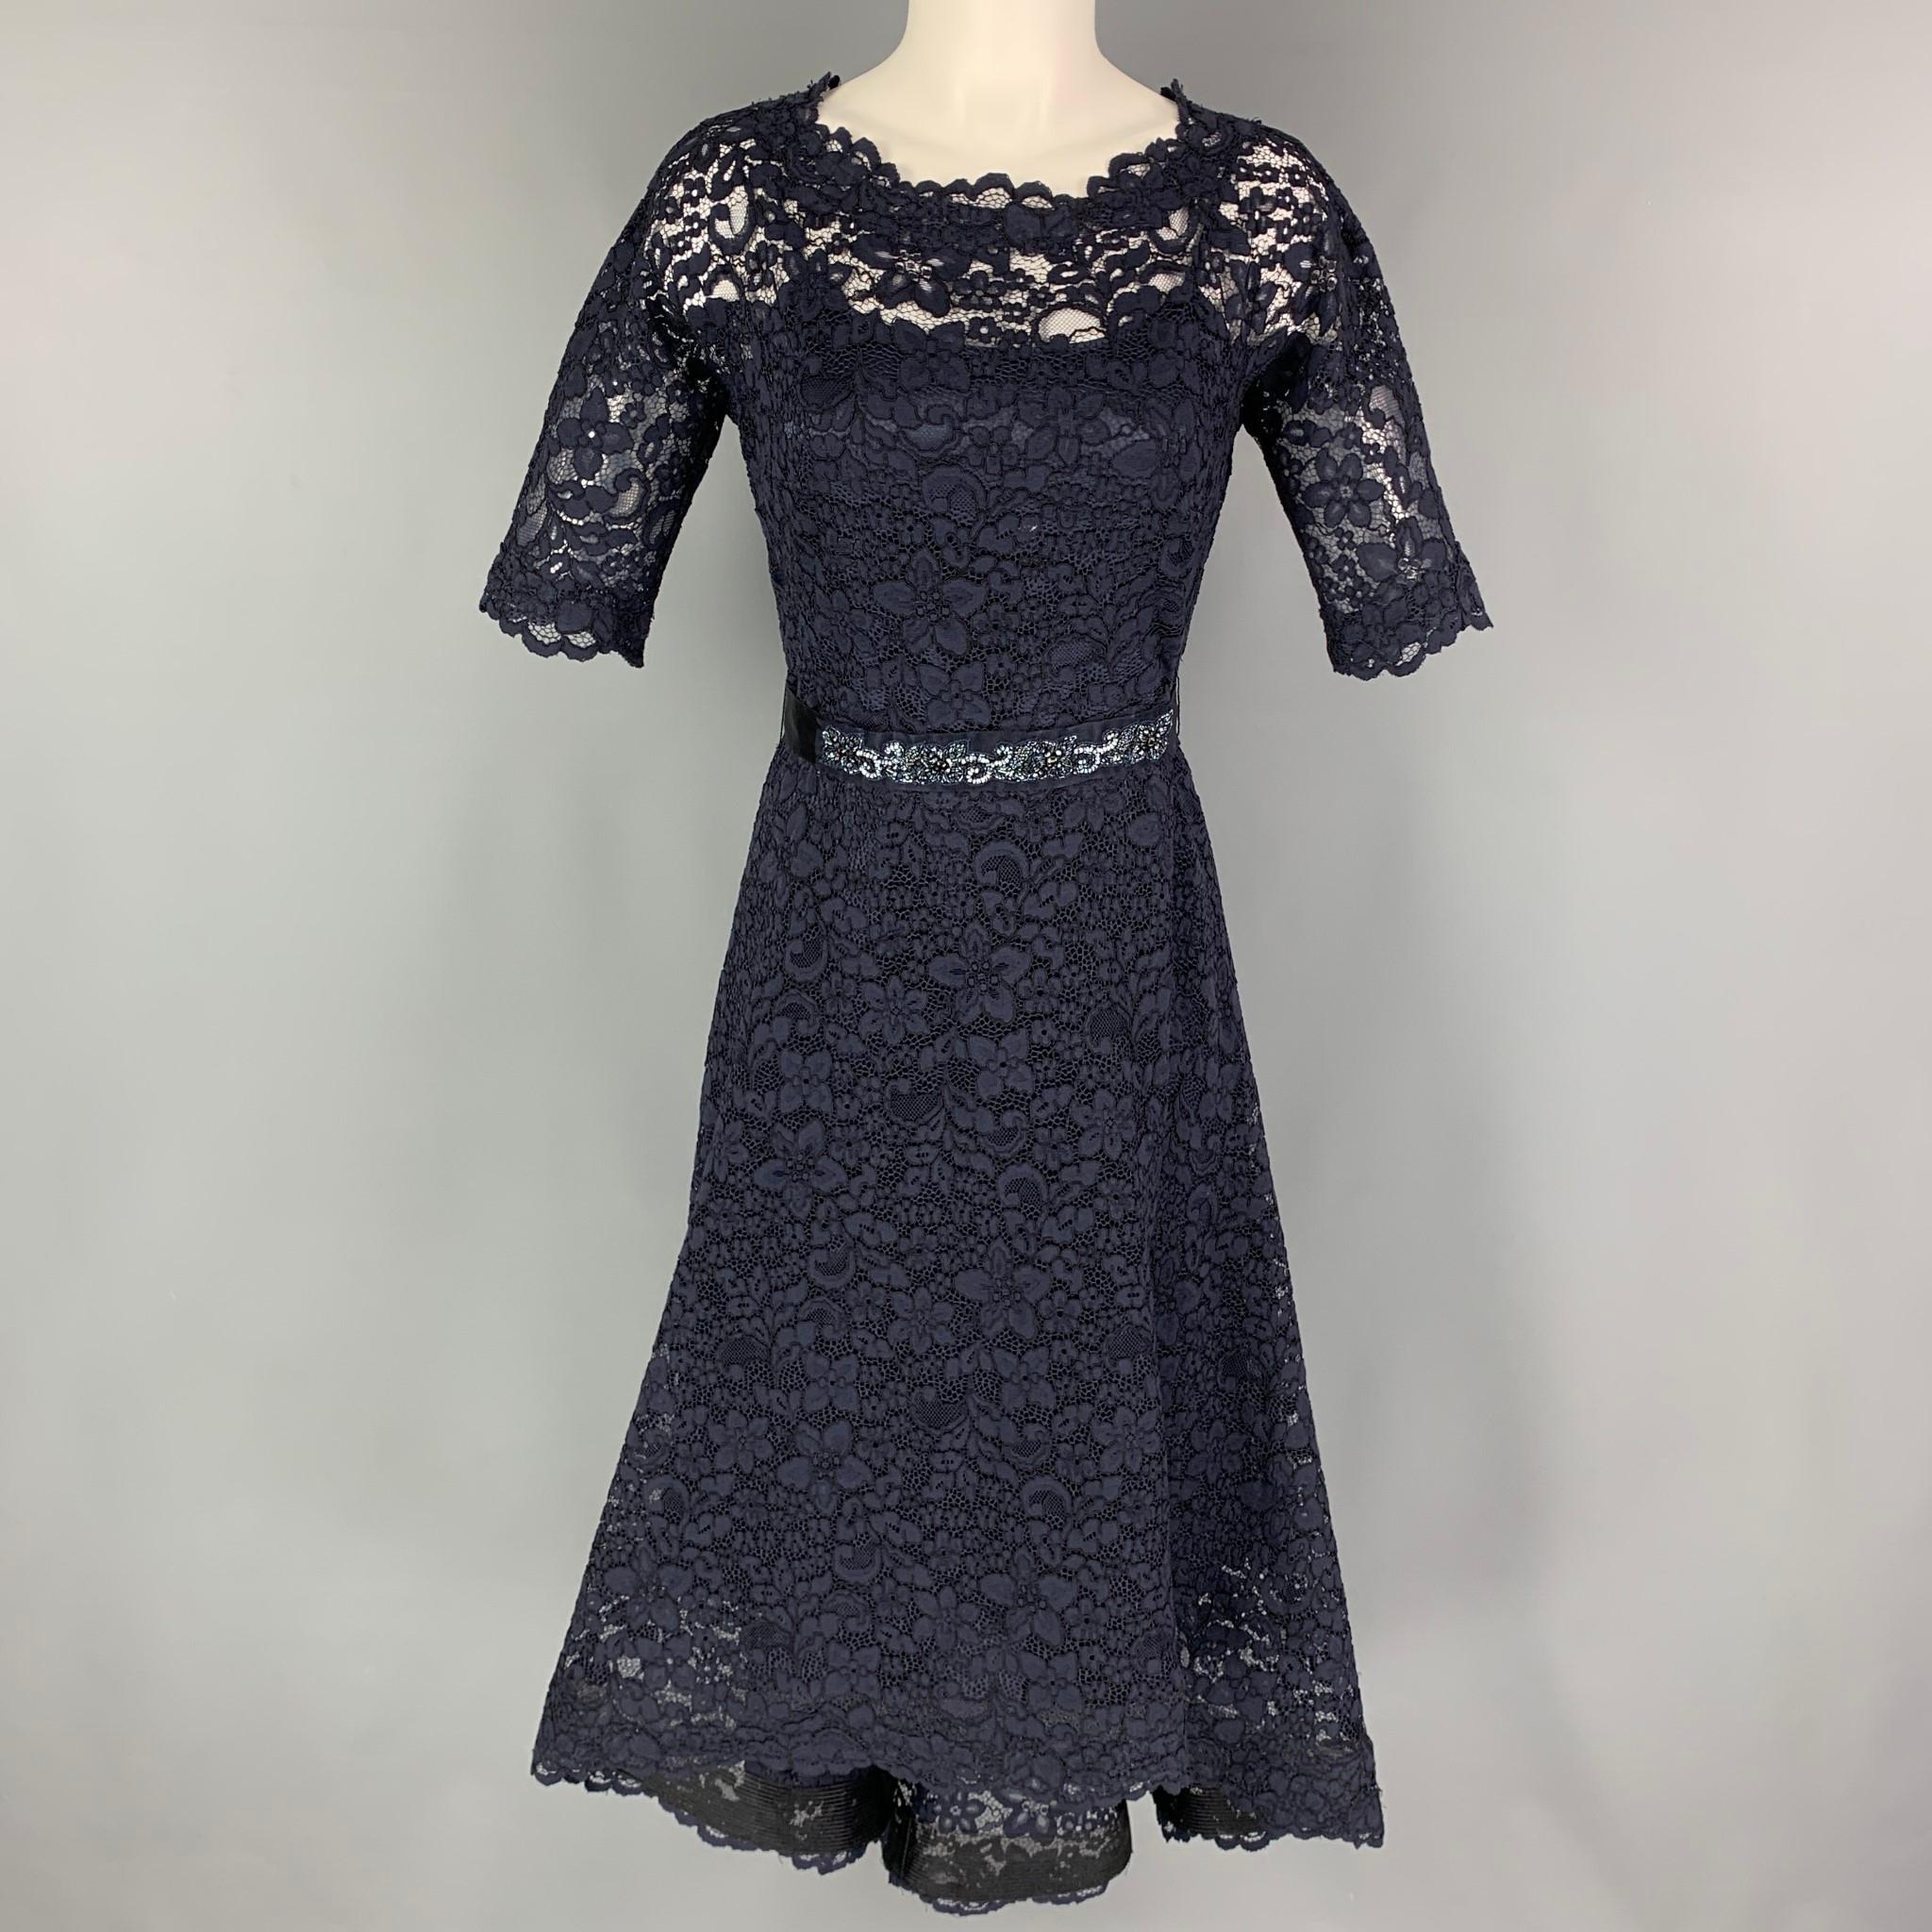 RICKIE FREEMAN for TERI JON dress comes in a navy lace cotton blend with a removable liner featuring an asymmetrical hem, belted rhinestone detail, and a back zip up closure. 

Very Good Pre-Owned Condition.
Marked: 2

Measurements:

Shoulder: 15